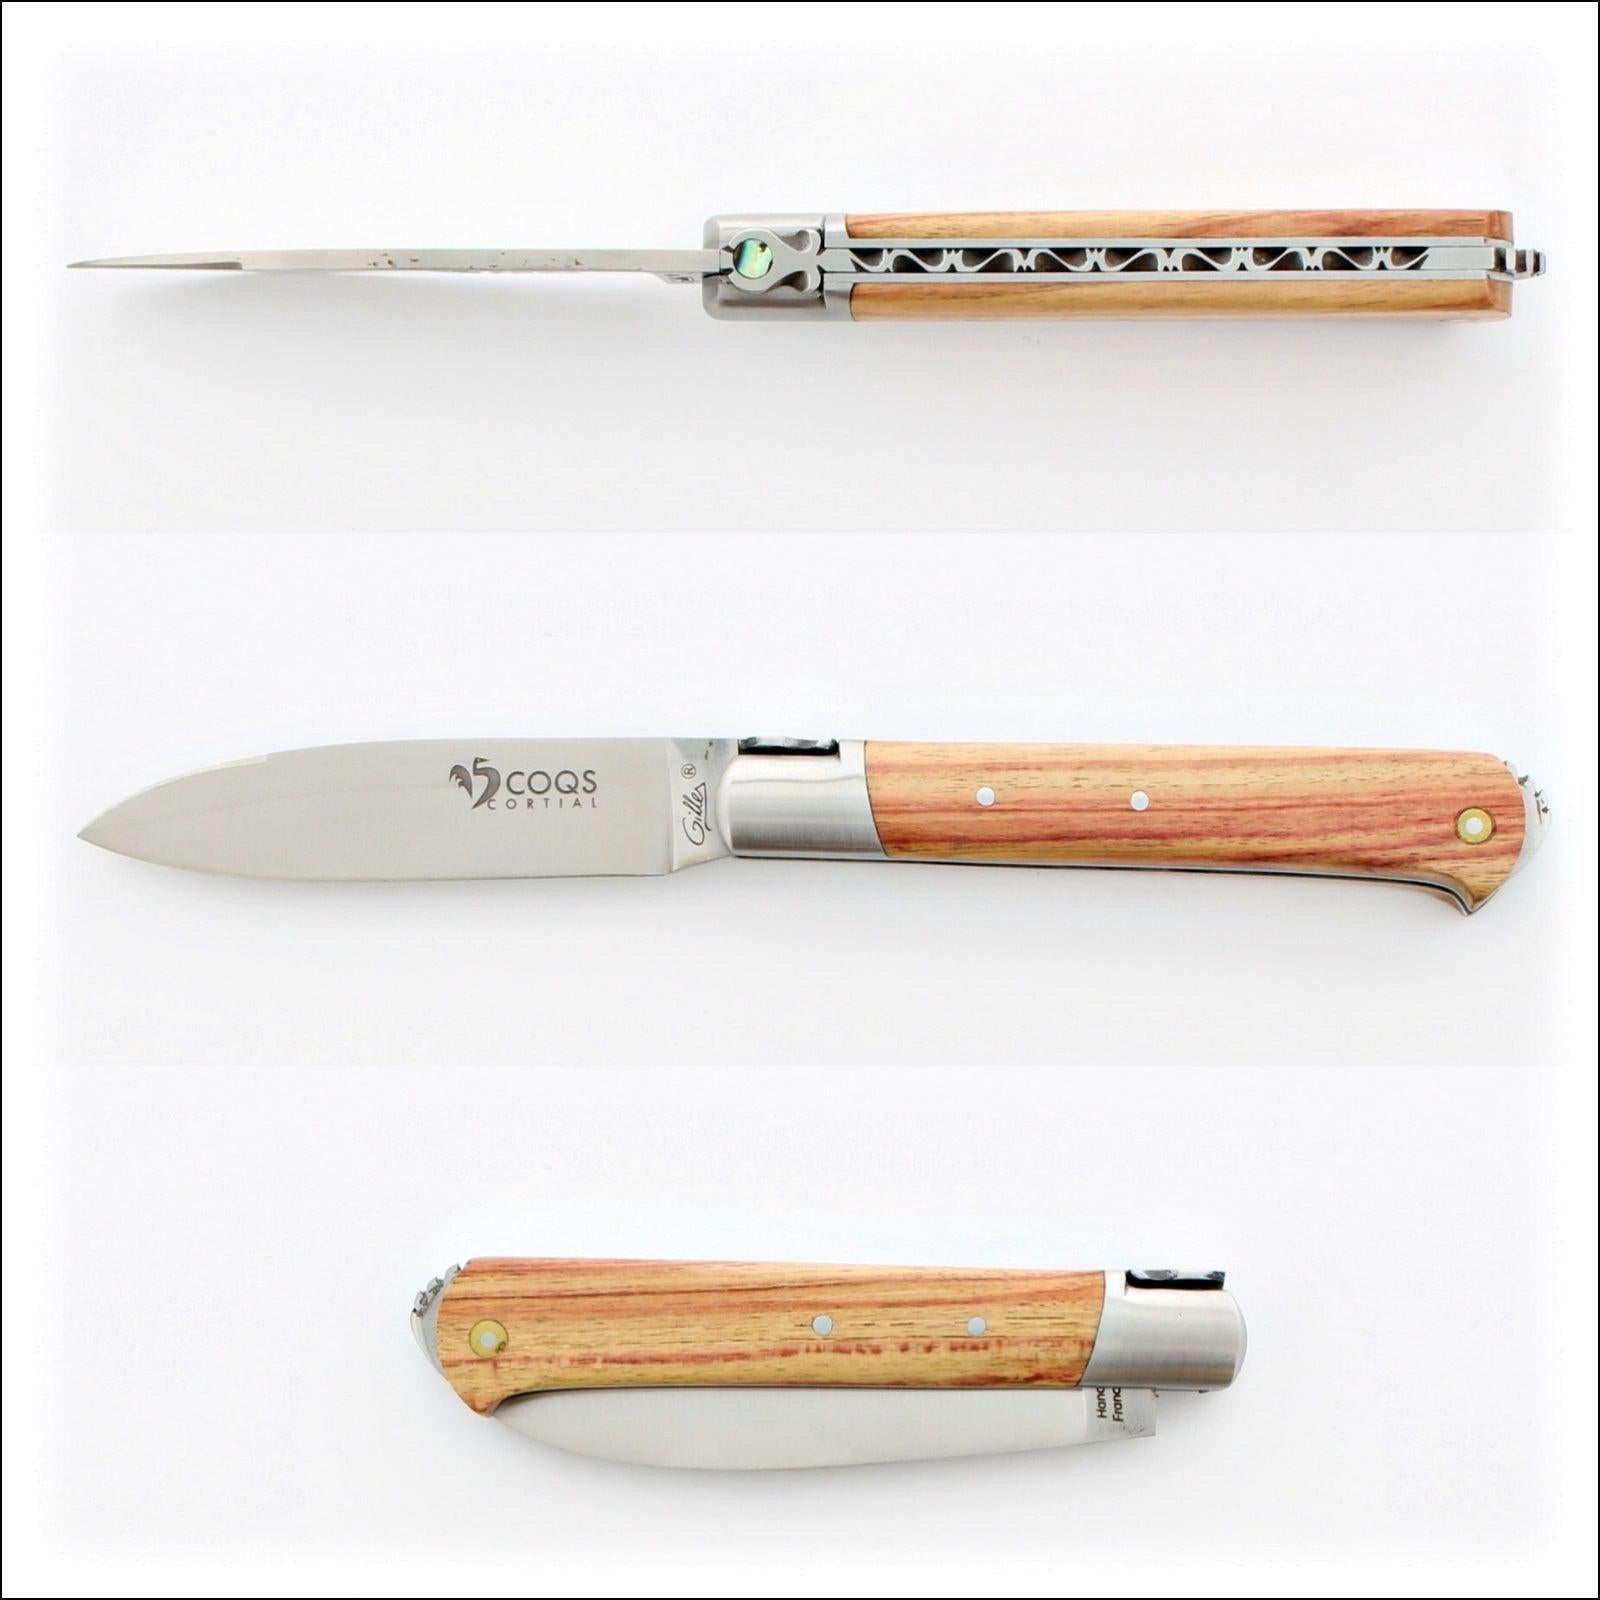 5 Coqs Pocket Knife - Rosewood & Mother of Pearl Inlay